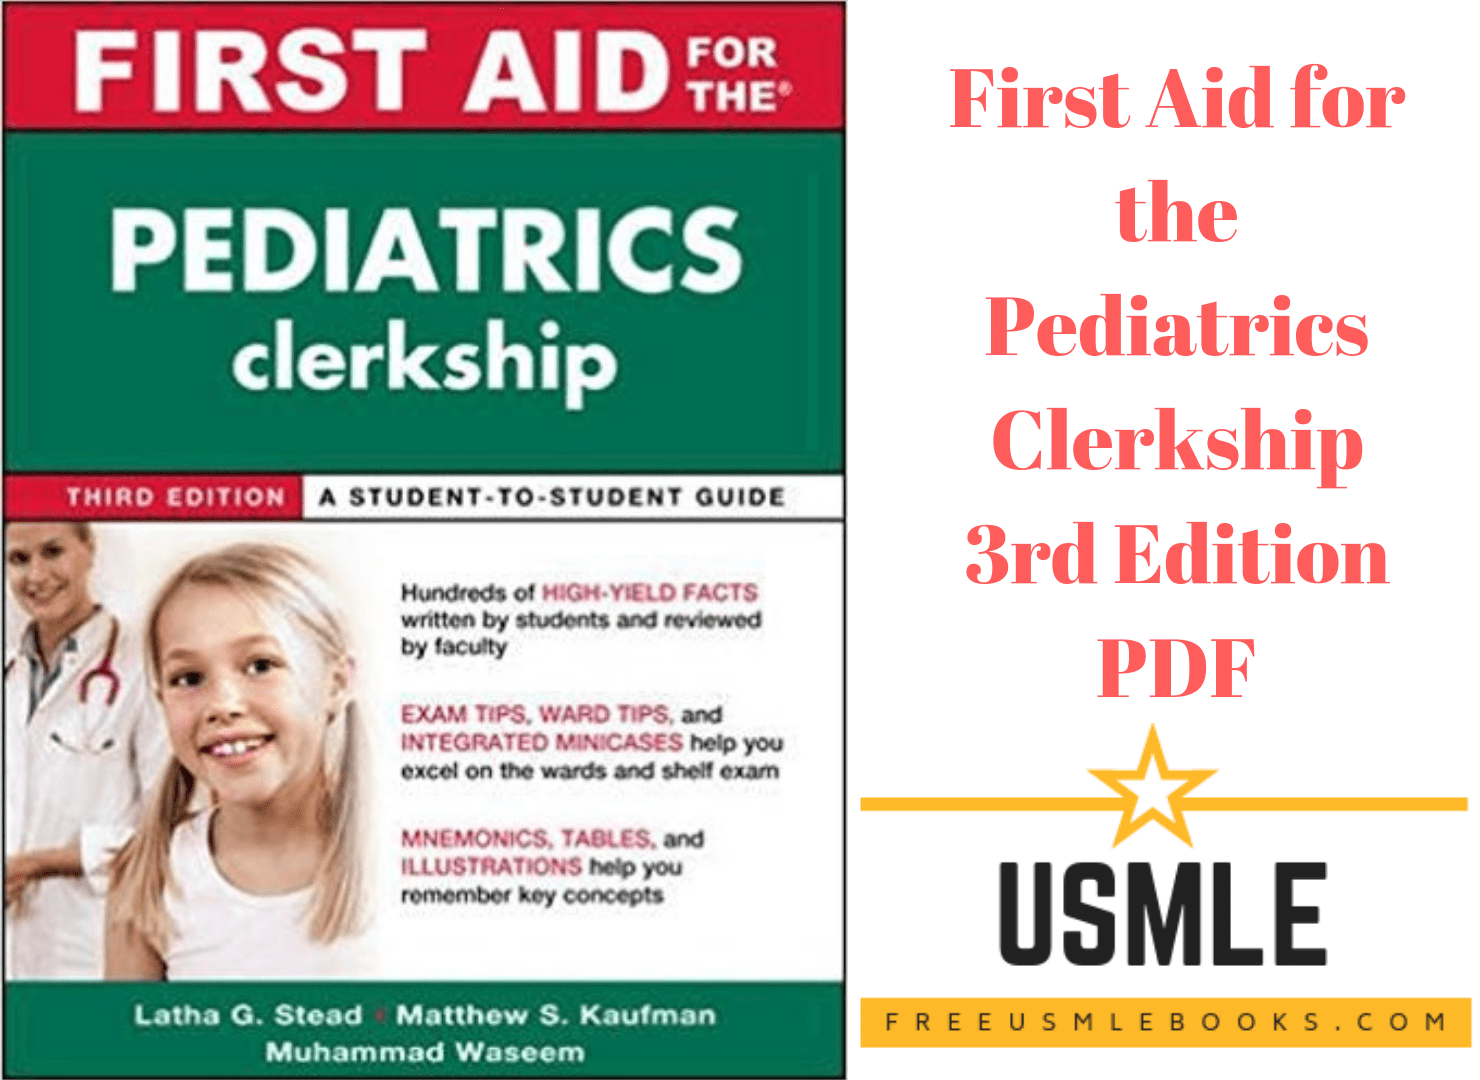 First Aid For The Pediatrics Clerkship 4th Edition Pdf Free Download